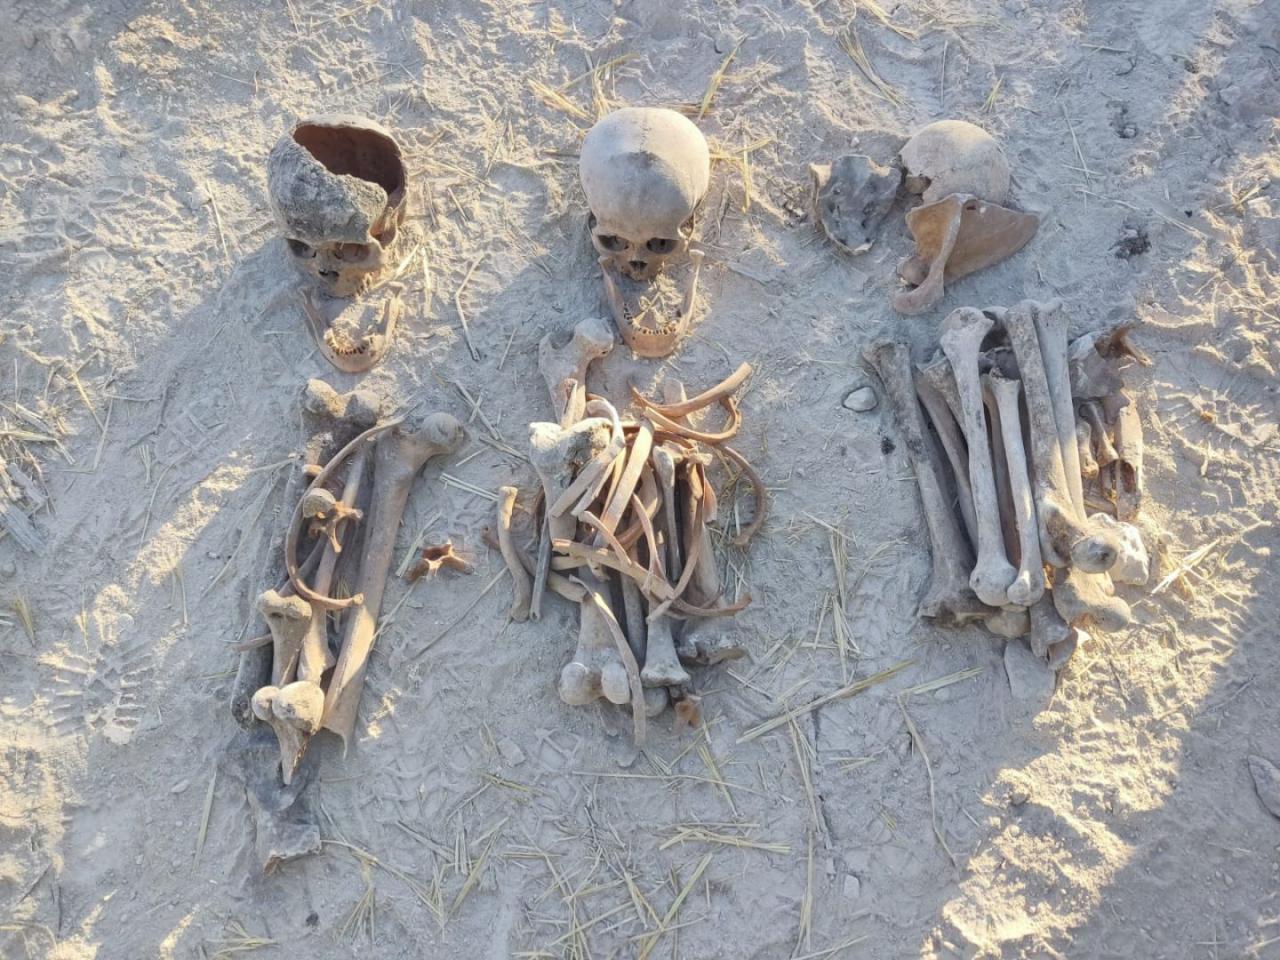 Newly-found human remains attest to Armenian atrocities in Karabakh [PHOTO]